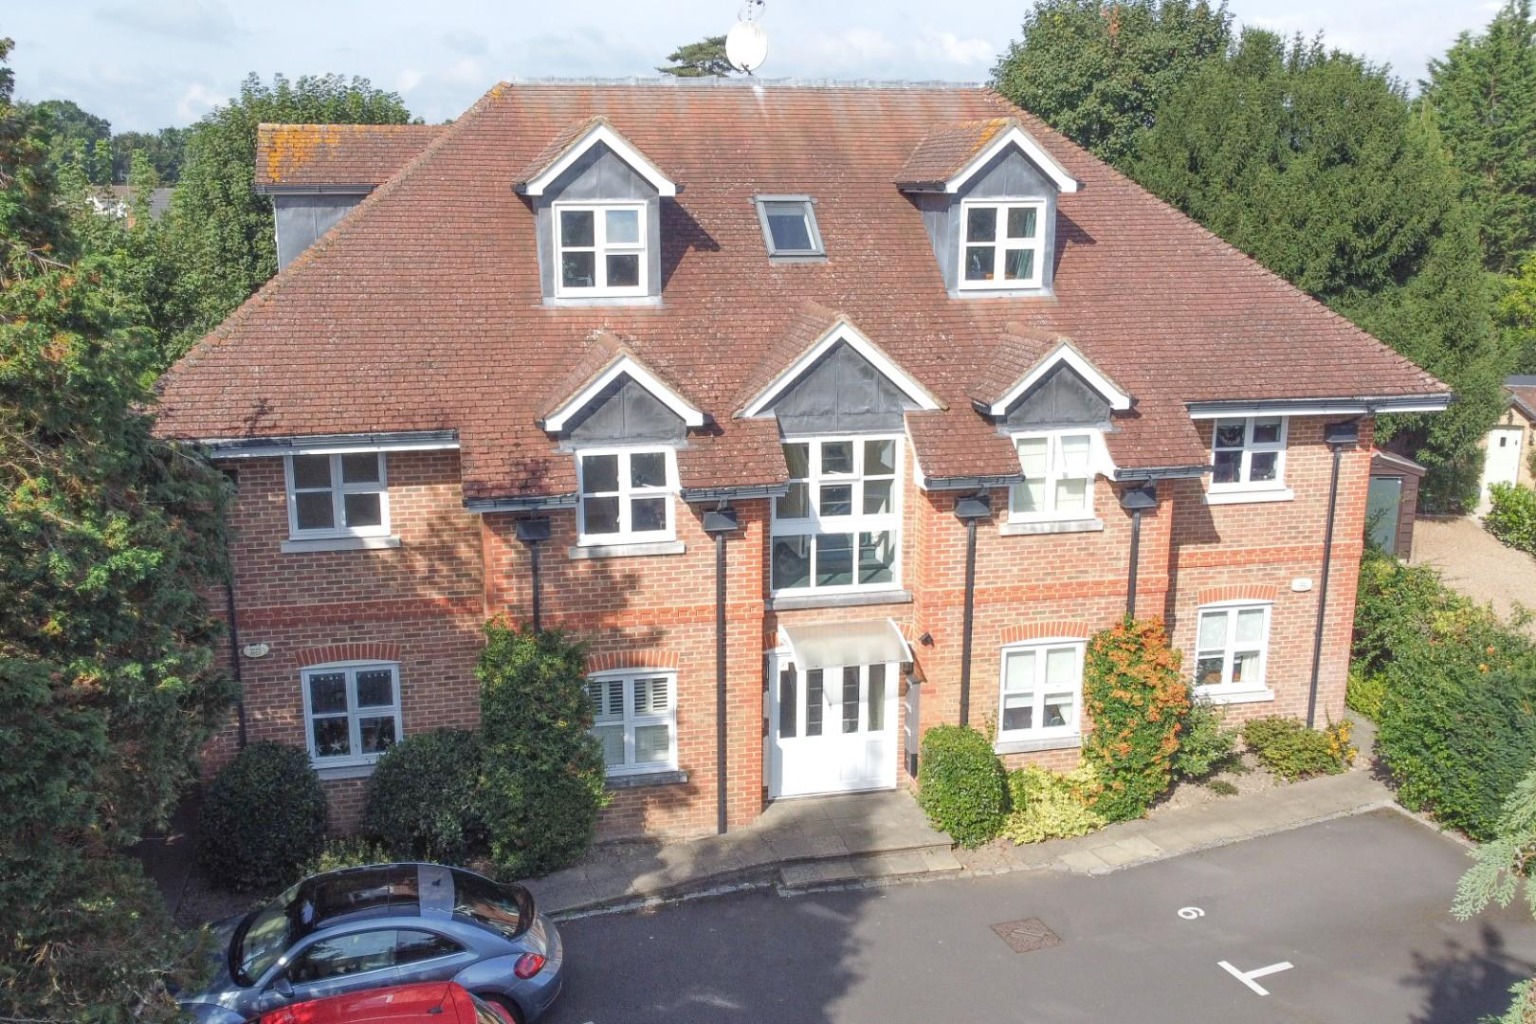 2 bed flat for sale in Rosemary Lane, Camberley, GU17